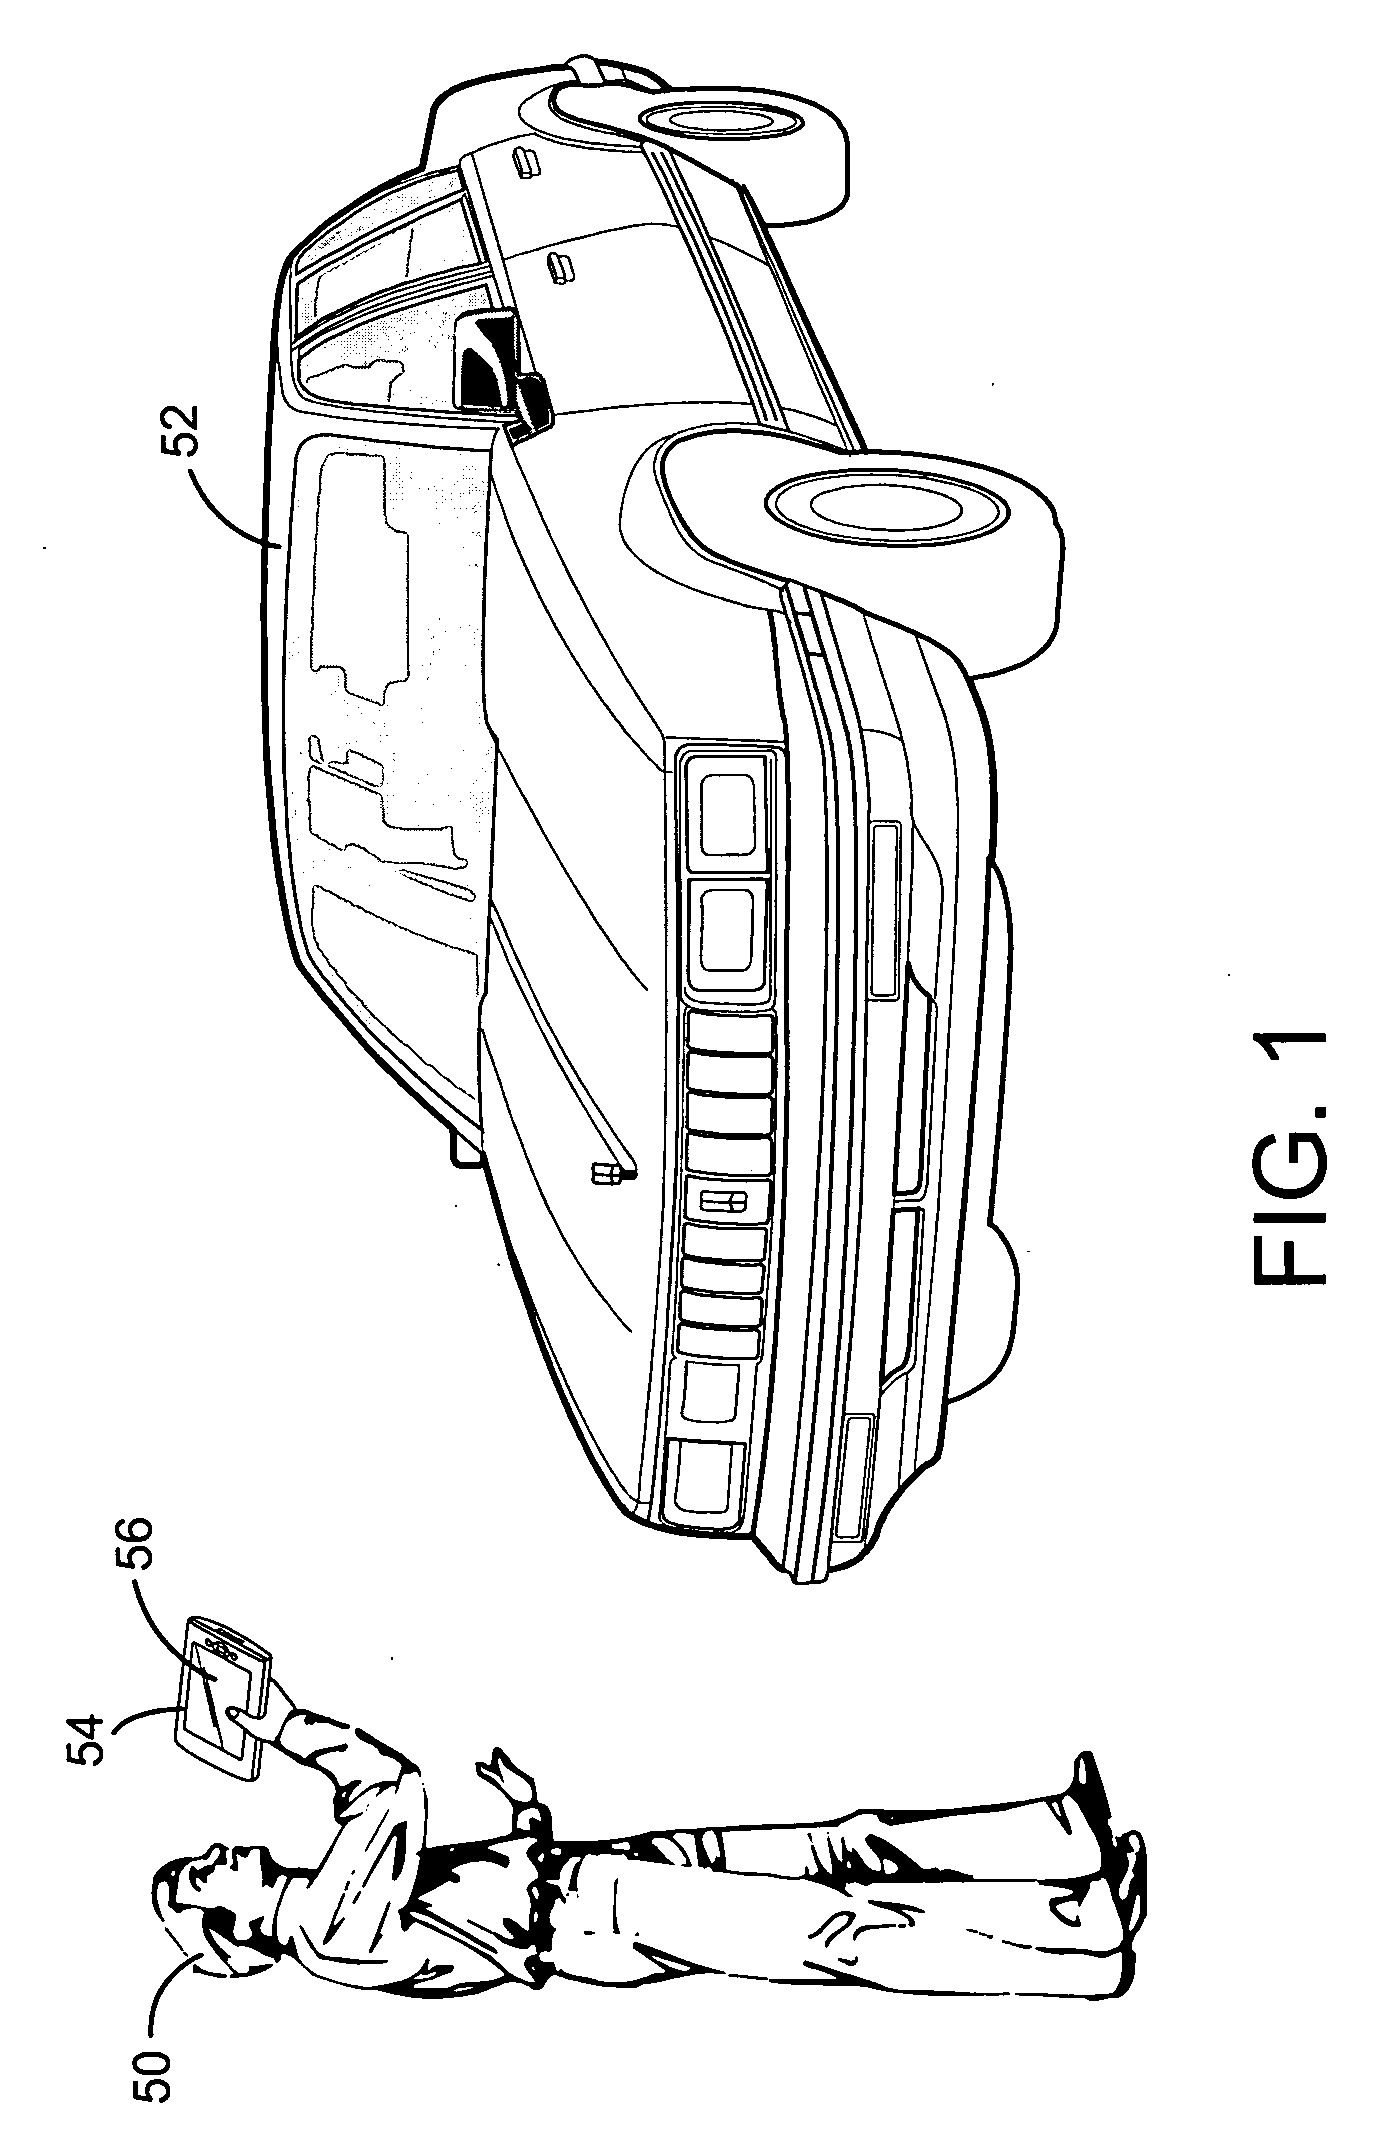 Computer-assisted and/or enabled systems, methods, techniques, services and user interfaces for conducting motor vehicle and other inspections